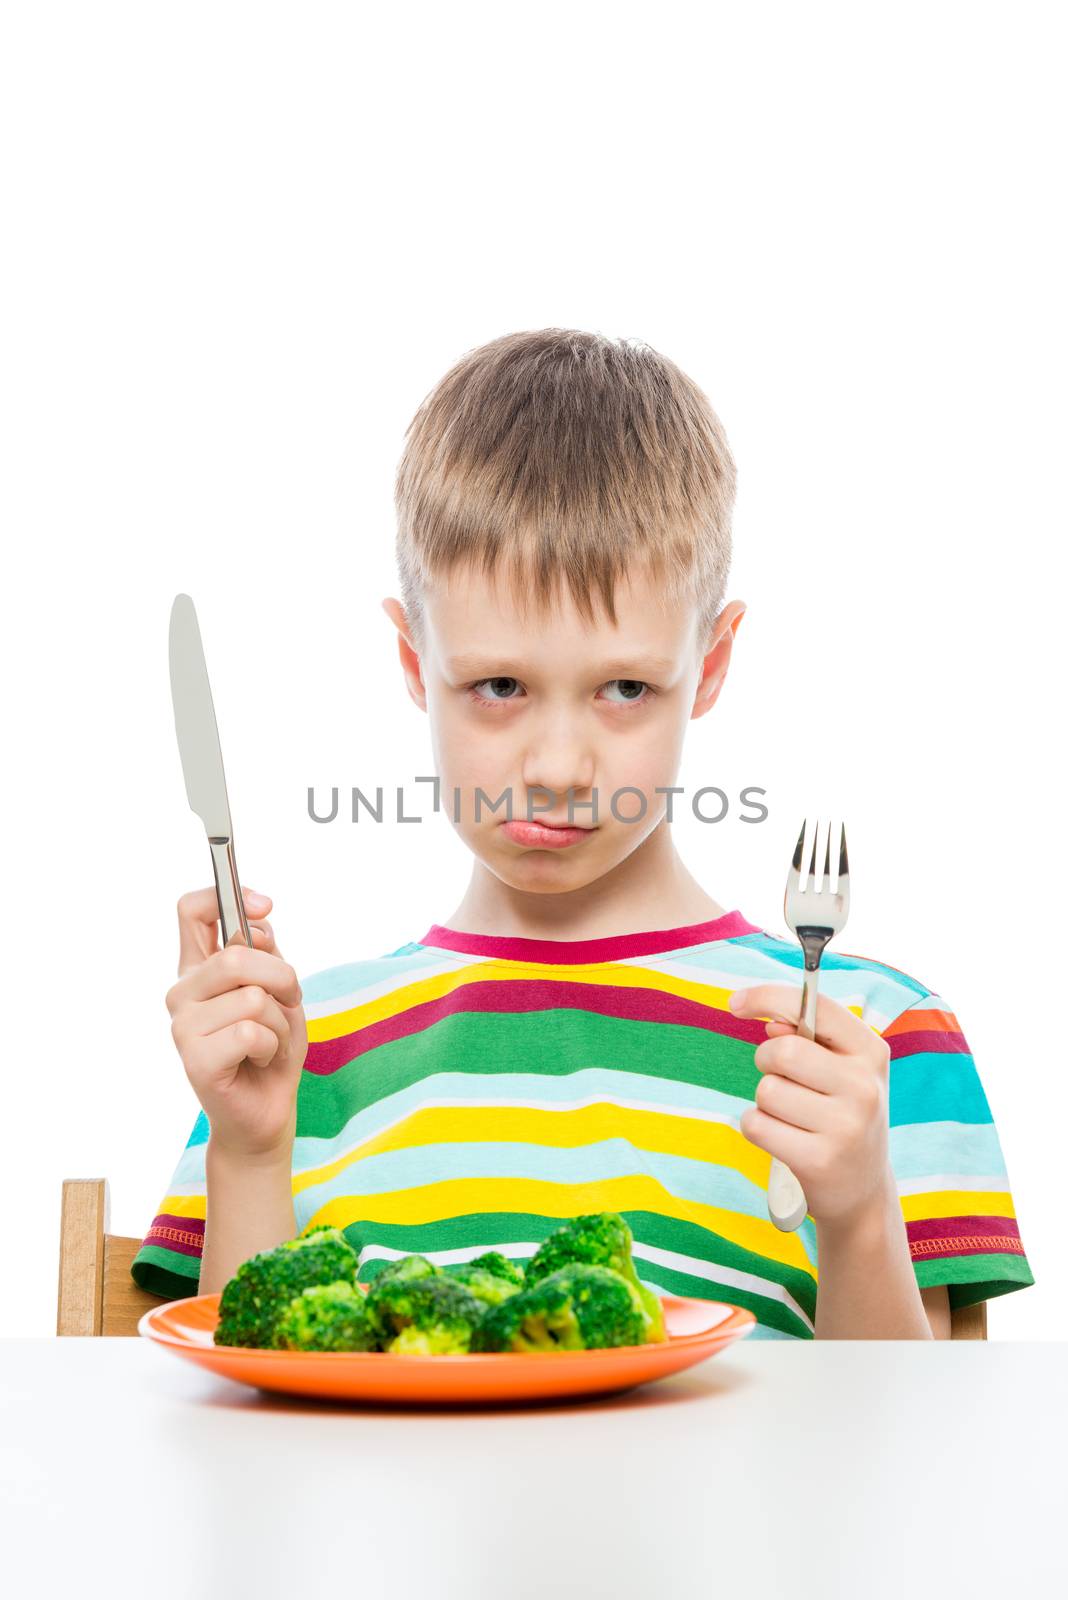 The boy with the unloved food broccoli on a white background